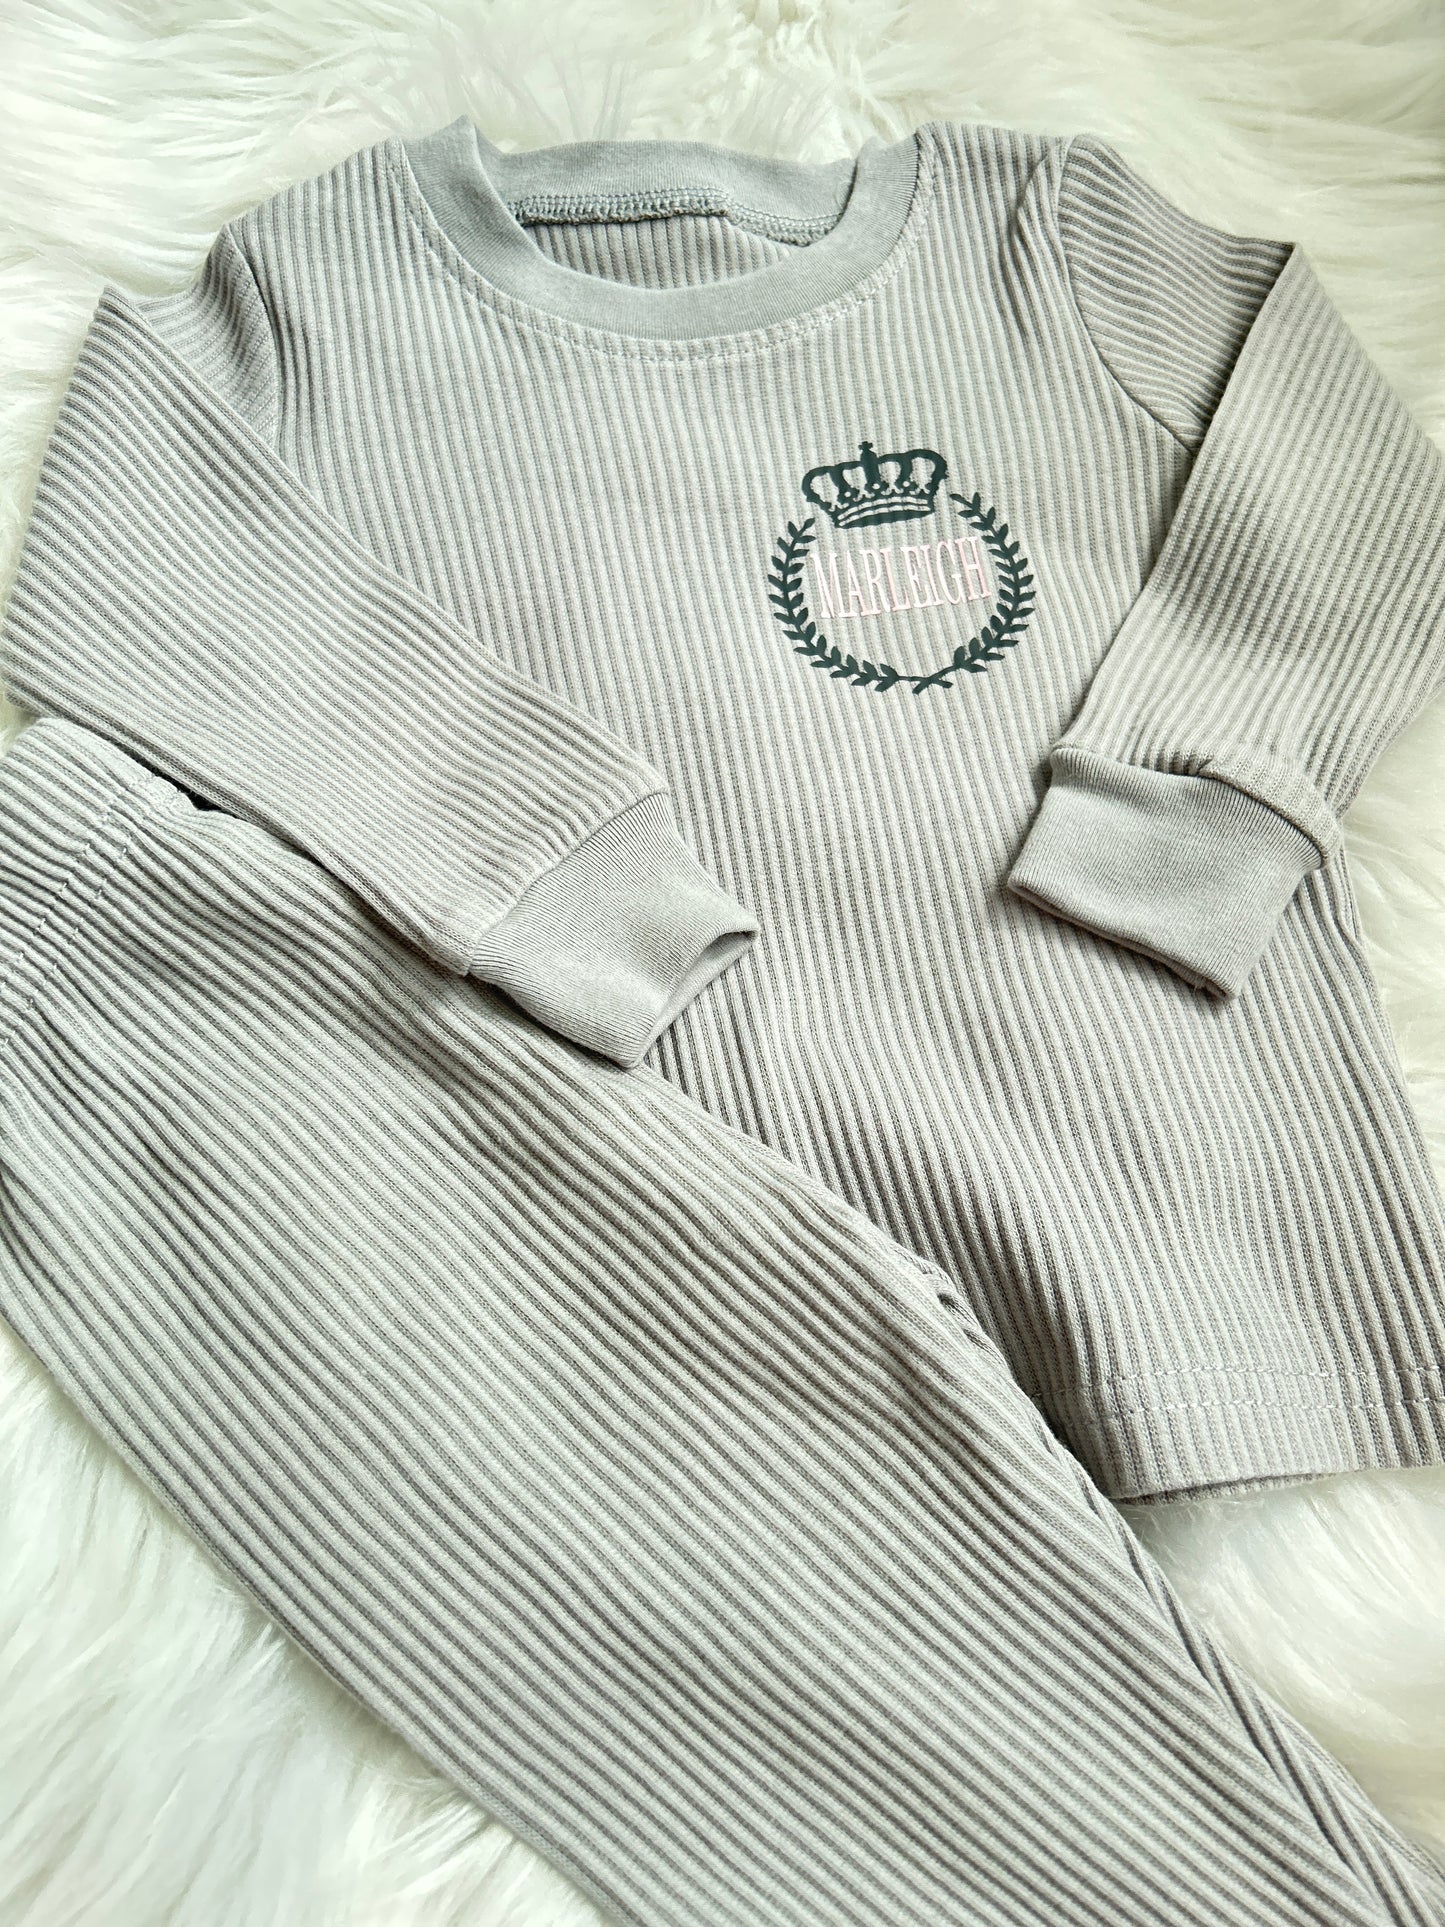 Personalised Baby / Child Lounge Set / Loungewear - Crown & Crest - Ribbed